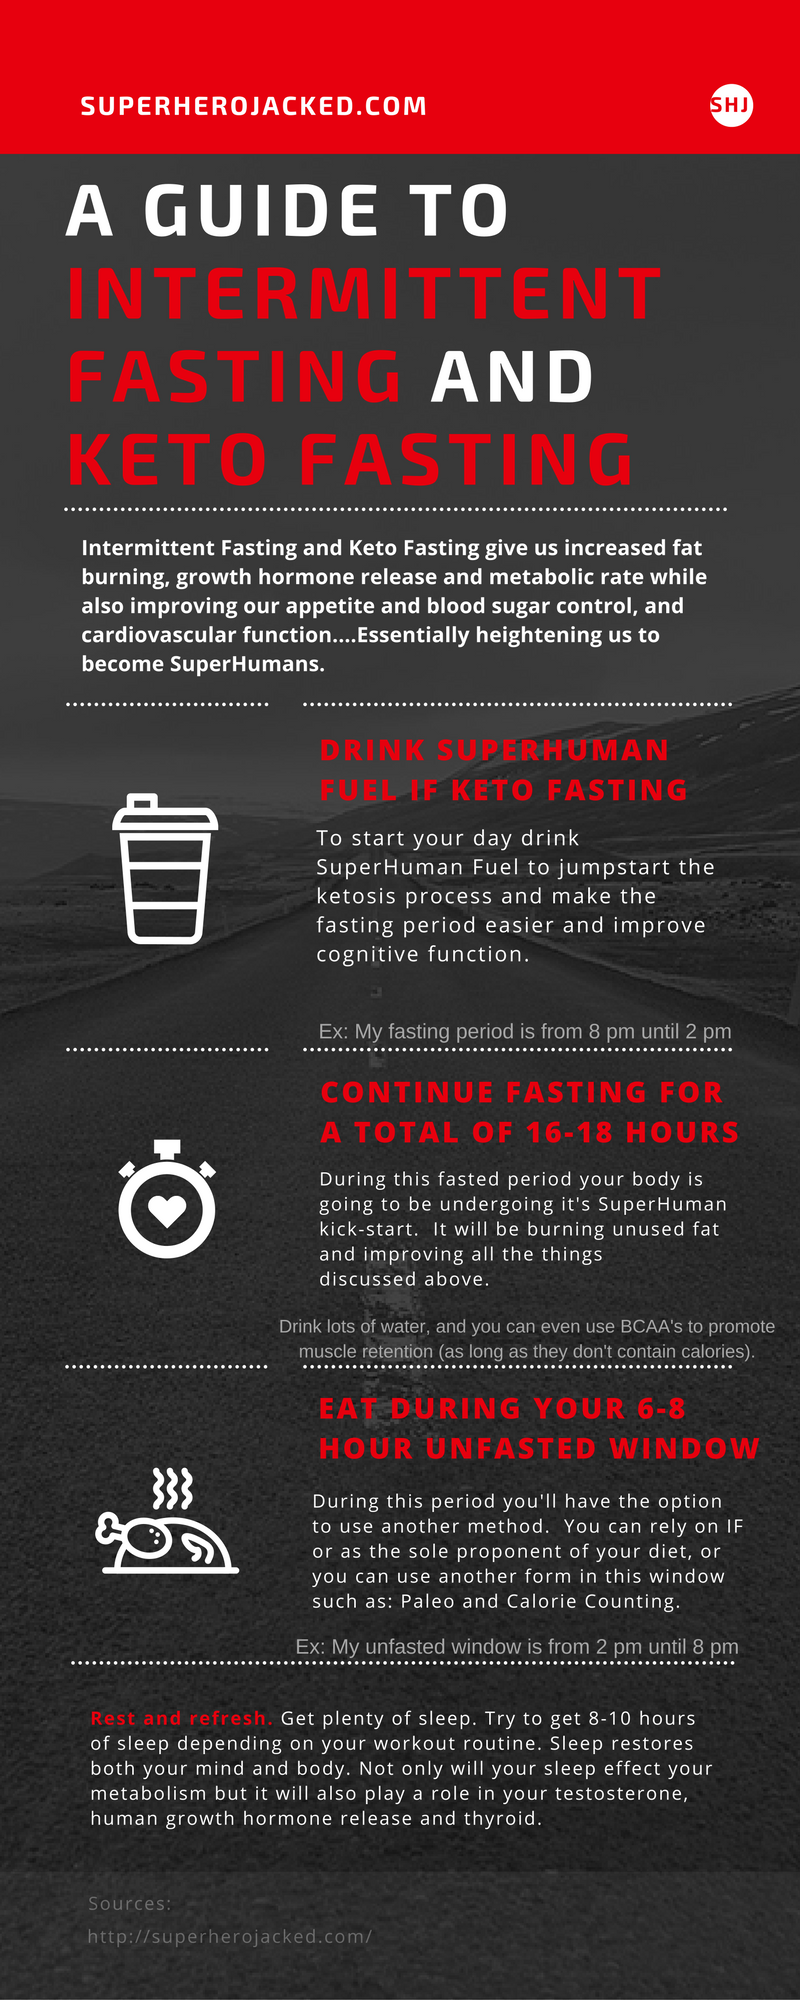 Guide to Intermittent Fasting [Infographic]